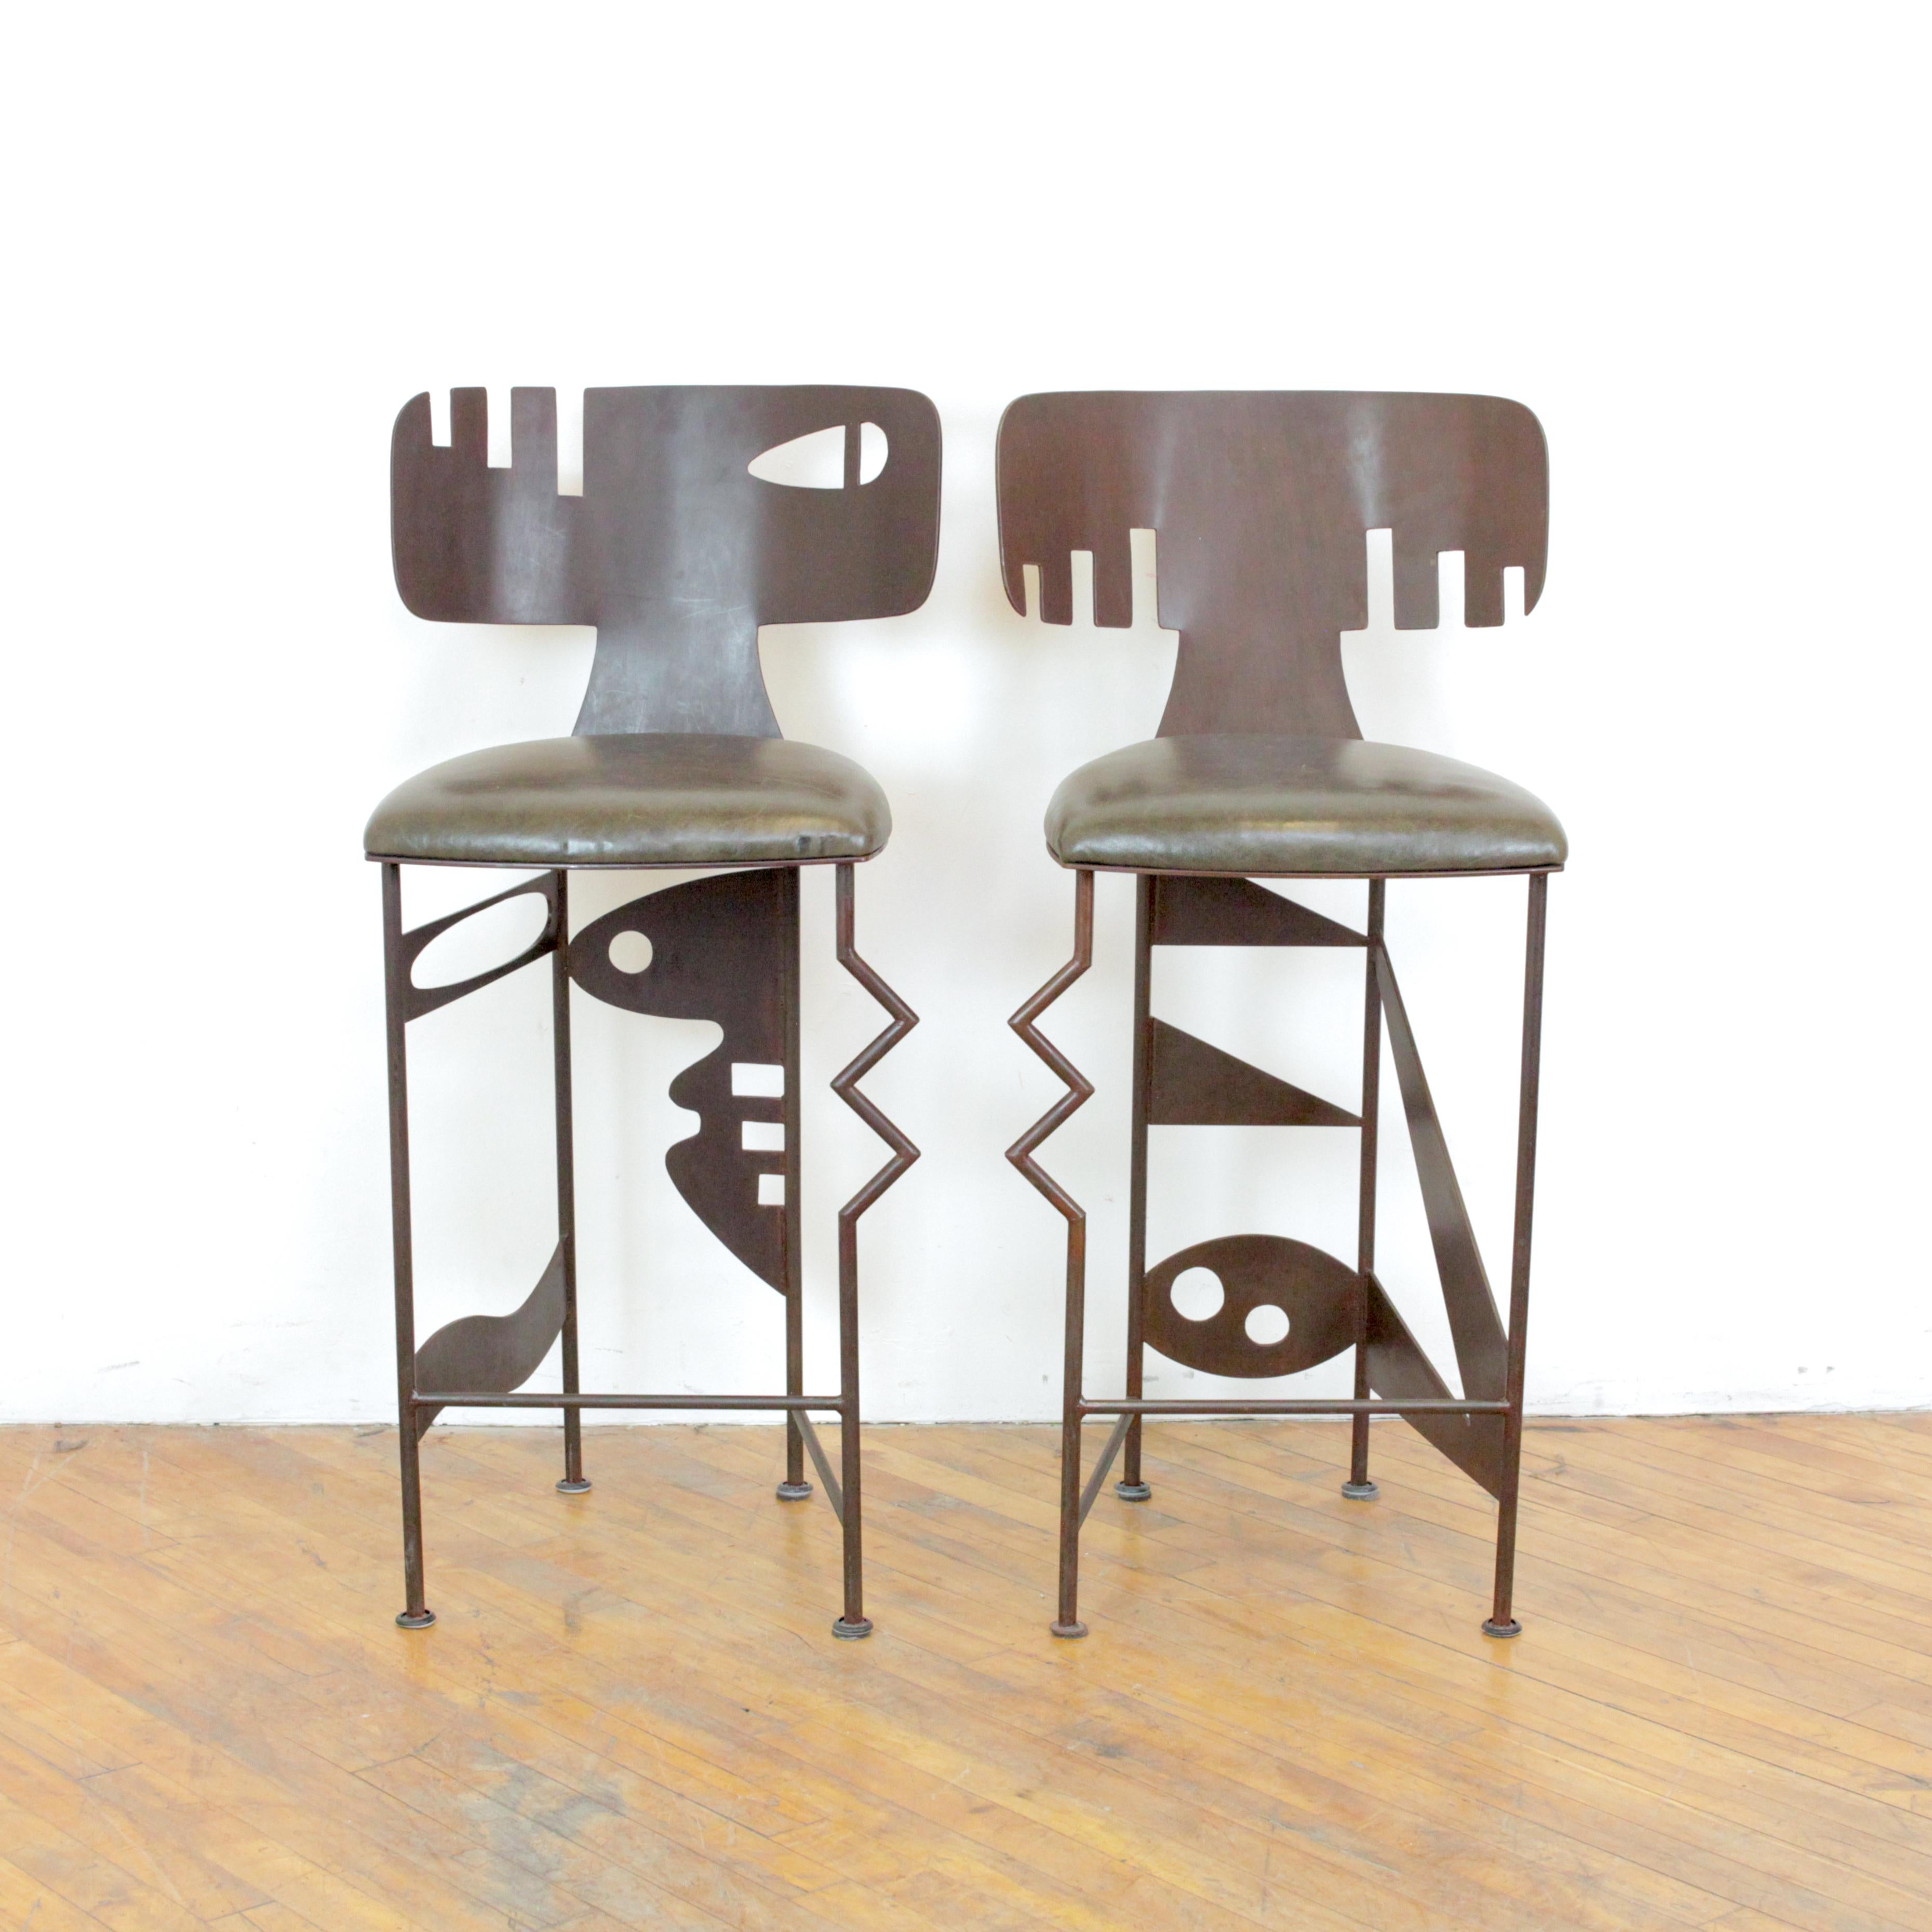 Pair of sculptural barstools by California artist Gregory Hawthorne constructed of acid-etched stainless steel and leather.  Hawthorne still has a gallery in Big Sur, California where his one-off designs and sculptures can still be purchased.  

17”